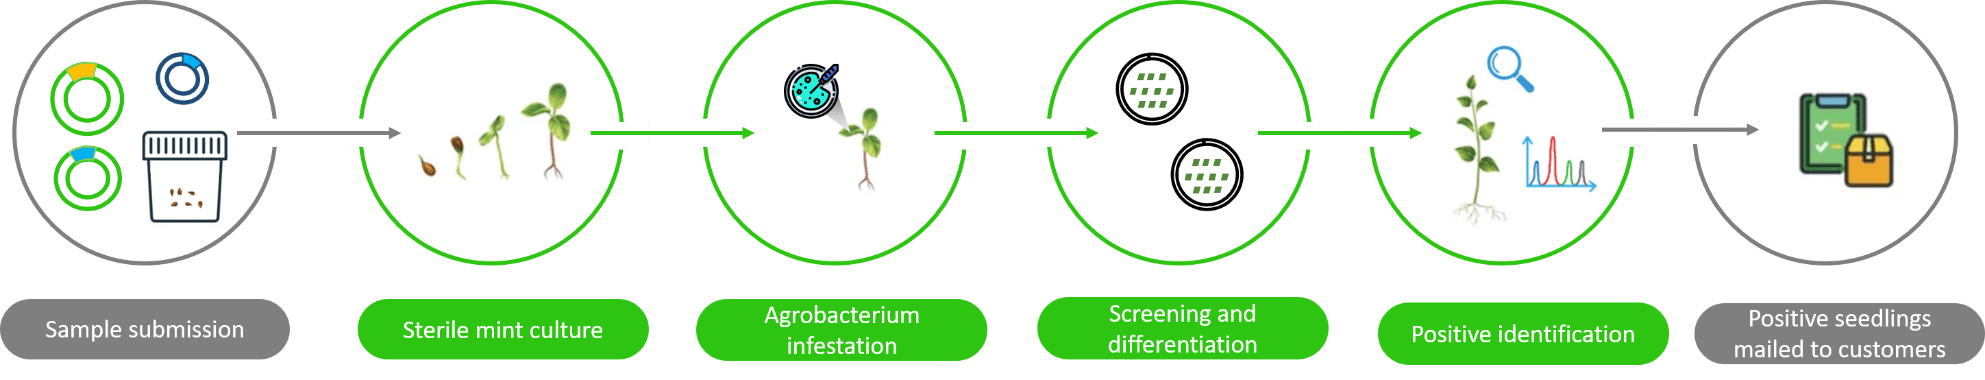 Schematic diagram of the standardized process of mint genetic transformation. - Lifeasible